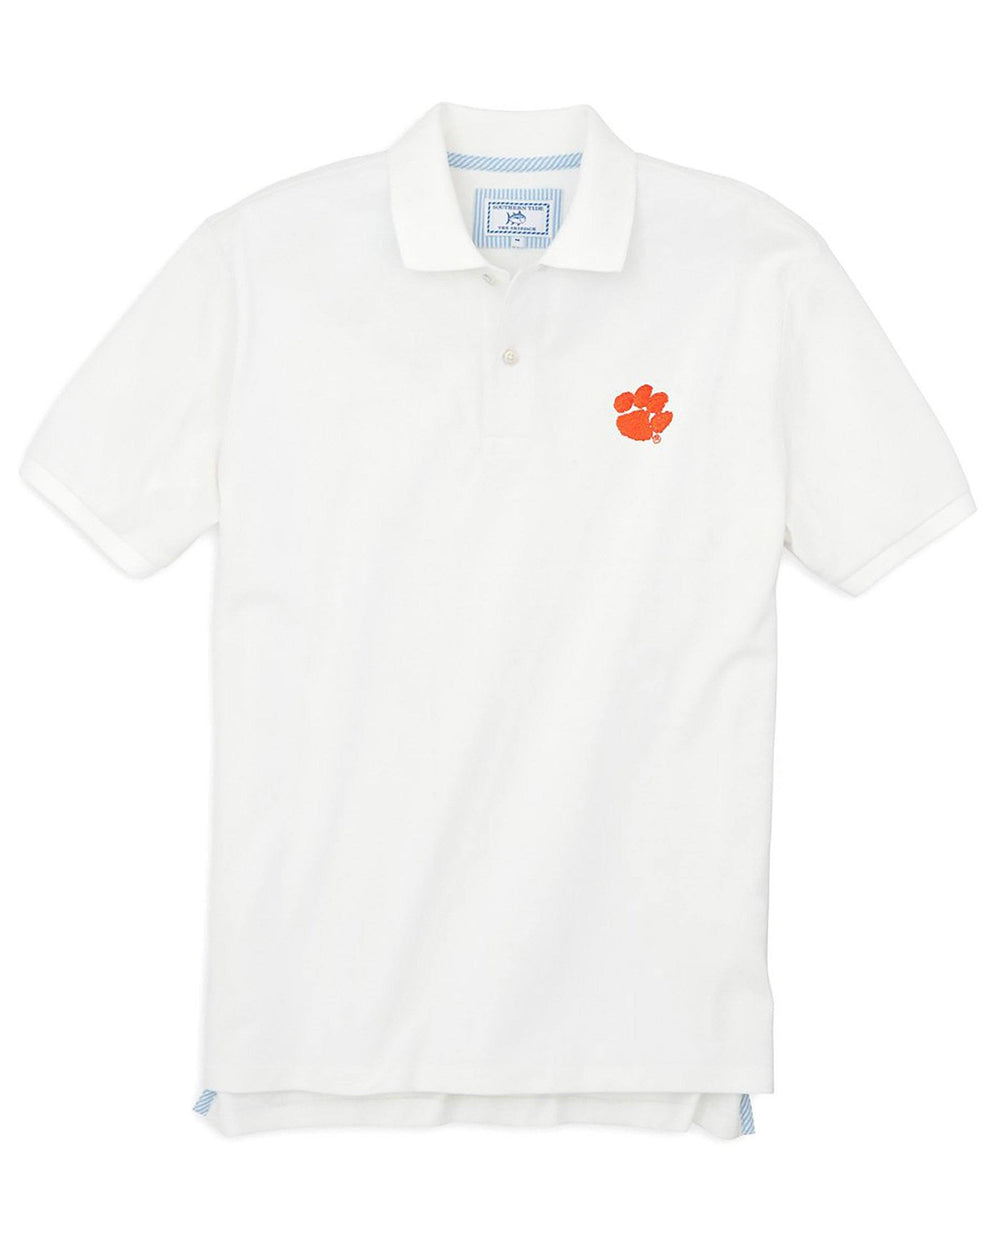 The front view of the Men's White Clemson Tigers Pique Polo Shirt by Southern Tide - Classic White